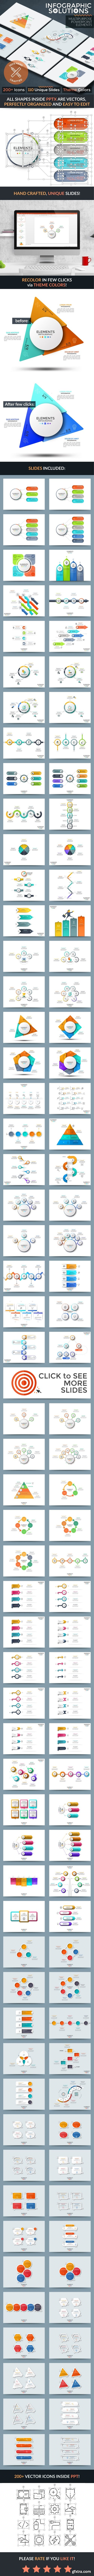 Graphicriver - Infographic Solutions. Powerpoint Template 22087401